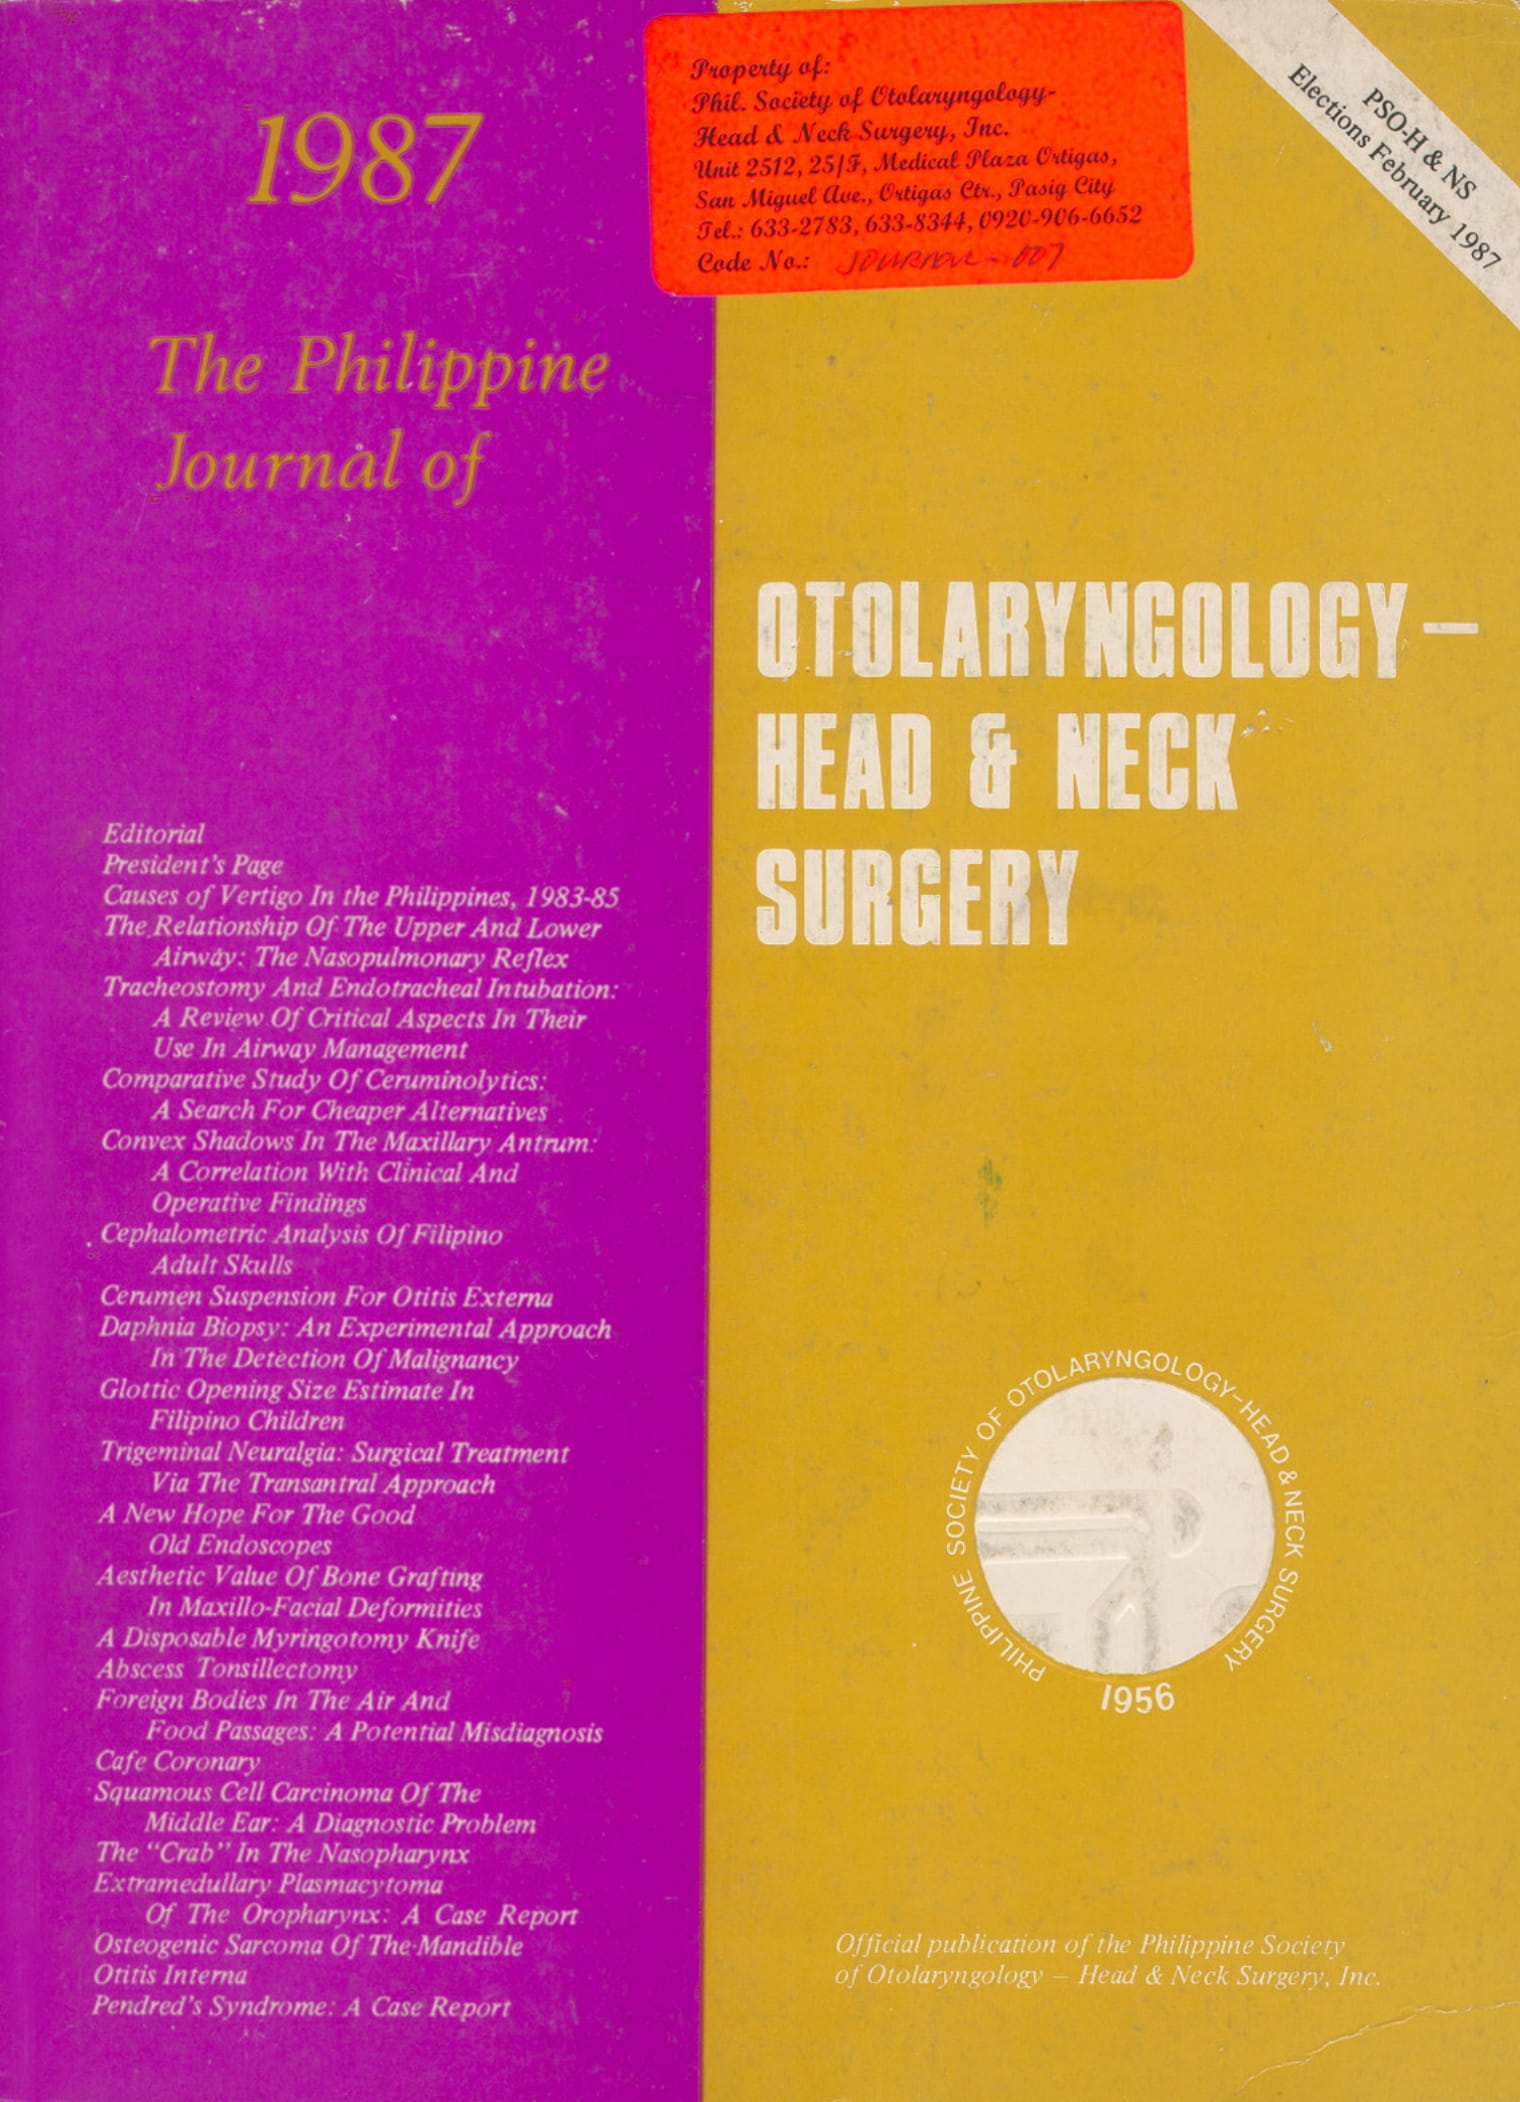 					View 1987: Philippine Journal of Otolaryngology-Head and Neck Surgery
				